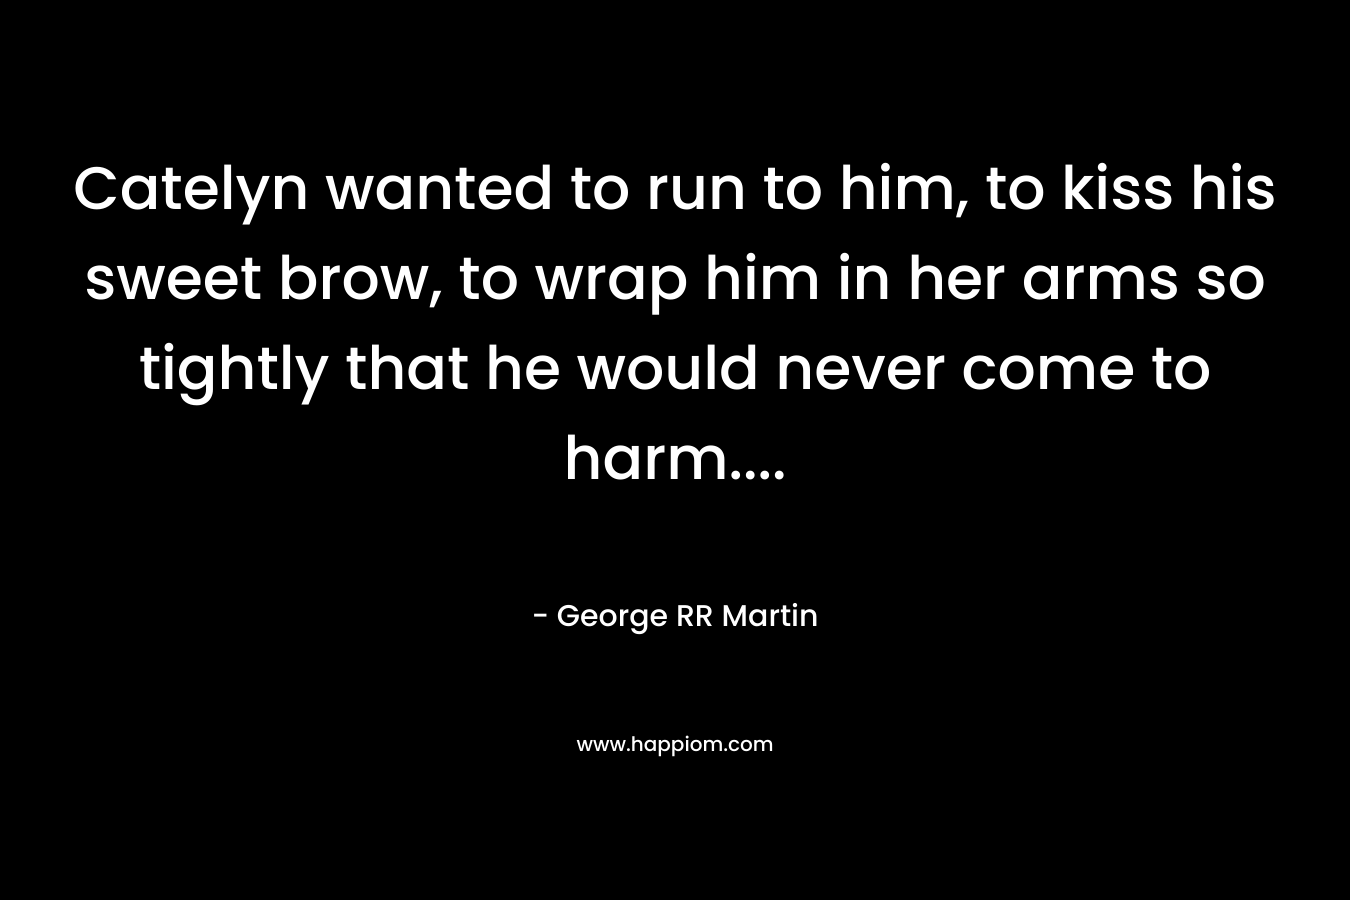 Catelyn wanted to run to him, to kiss his sweet brow, to wrap him in her arms so tightly that he would never come to harm…. – George RR Martin